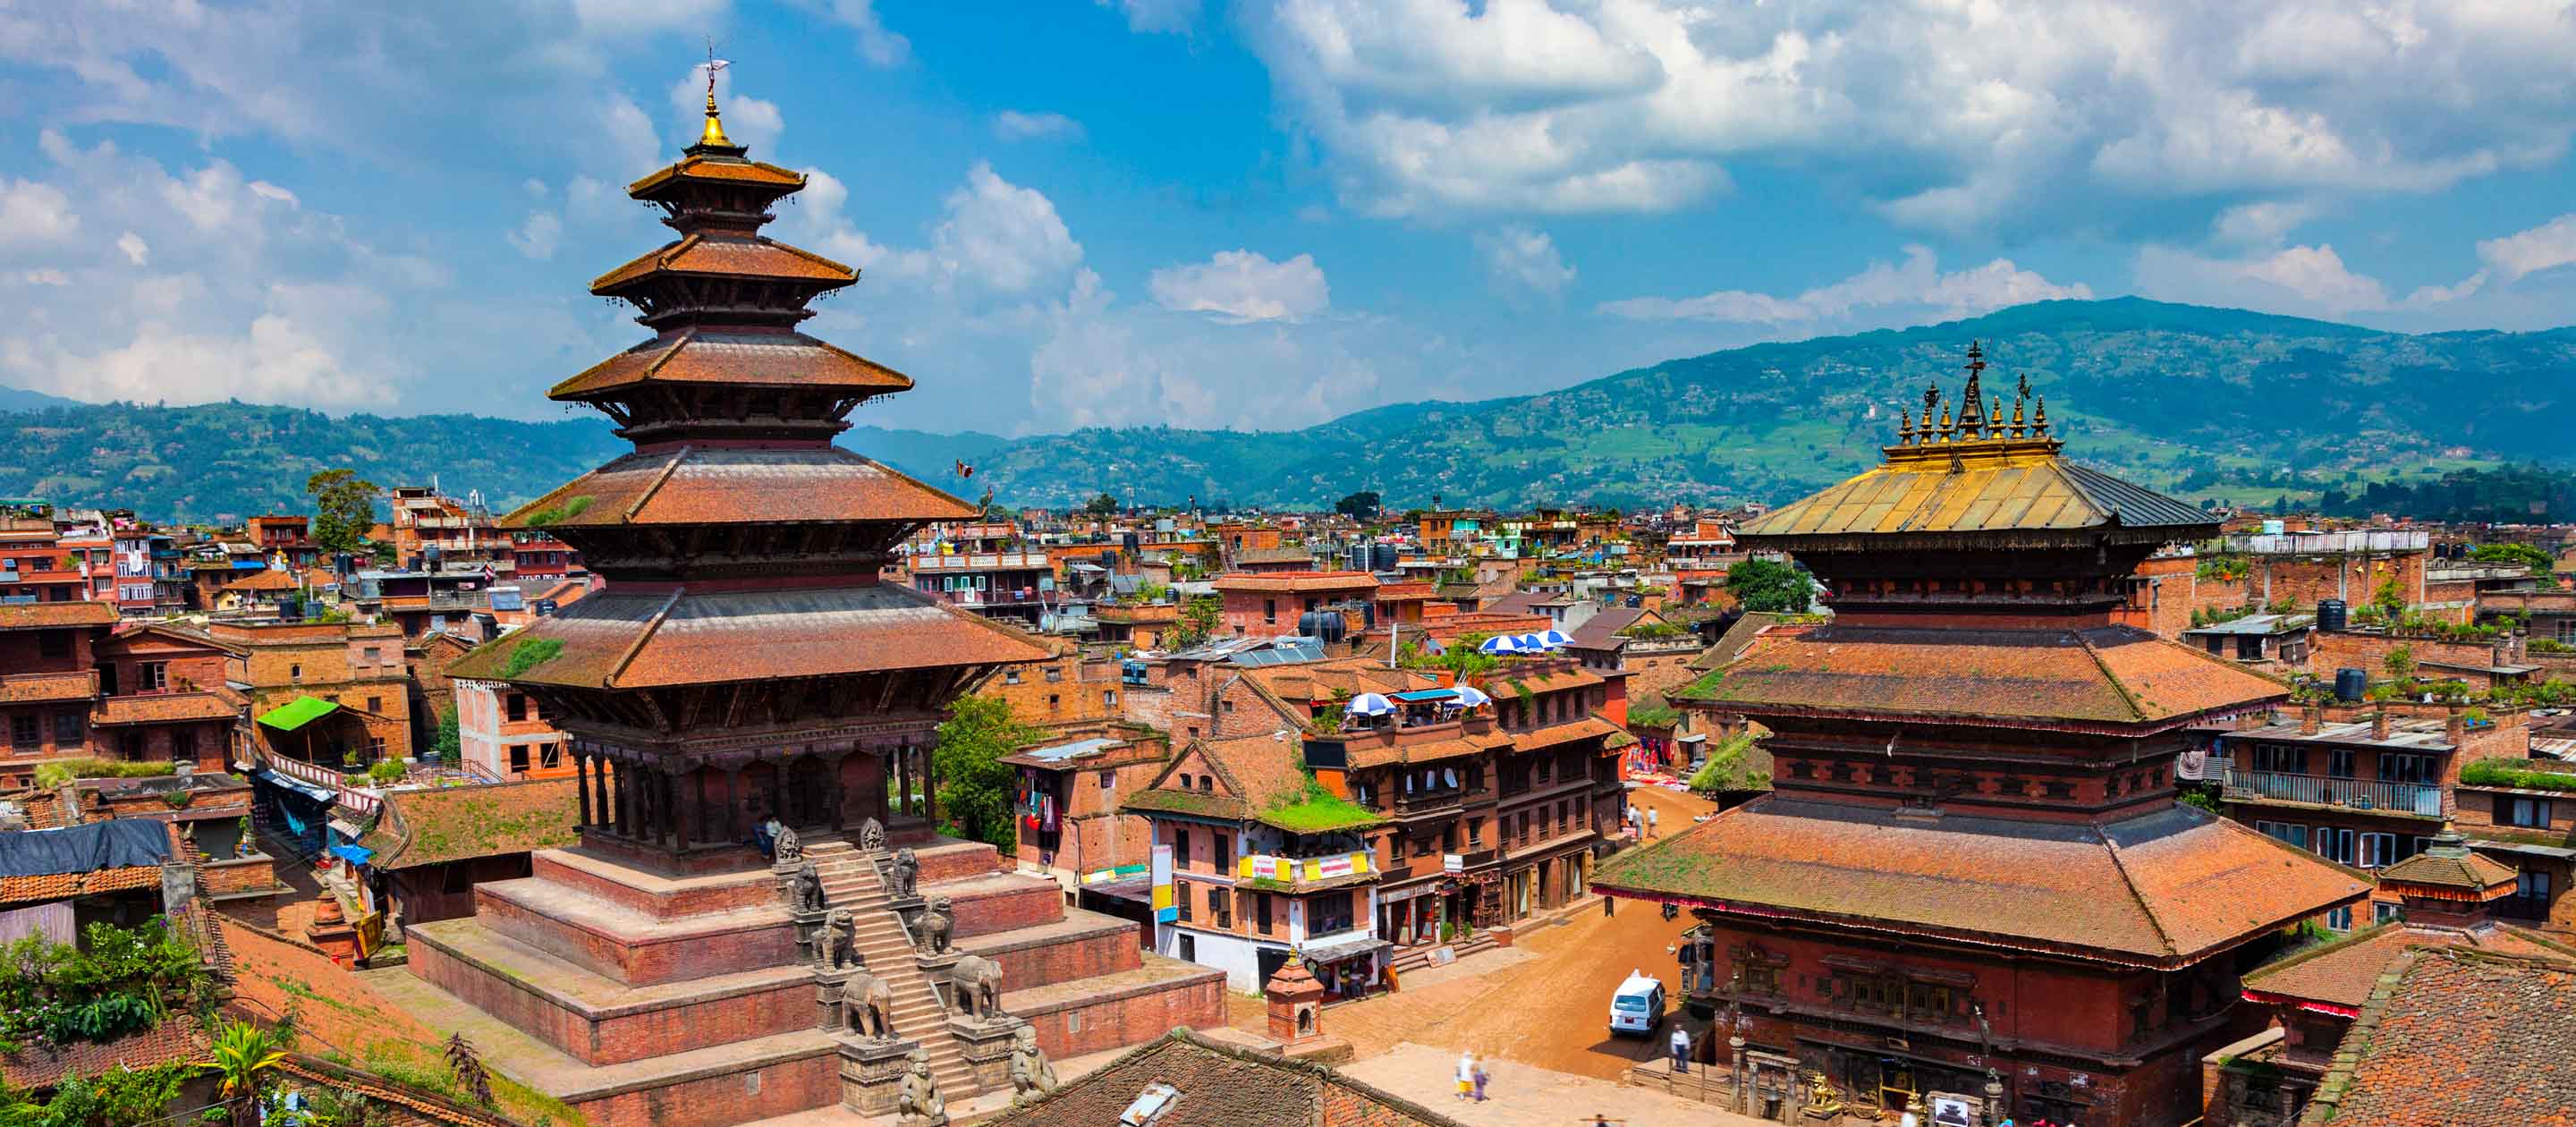 Nepal Adventure |NepalTour Packages - Book honeymoon ,family,adventure tour packages to Nepal|Travel Knits												